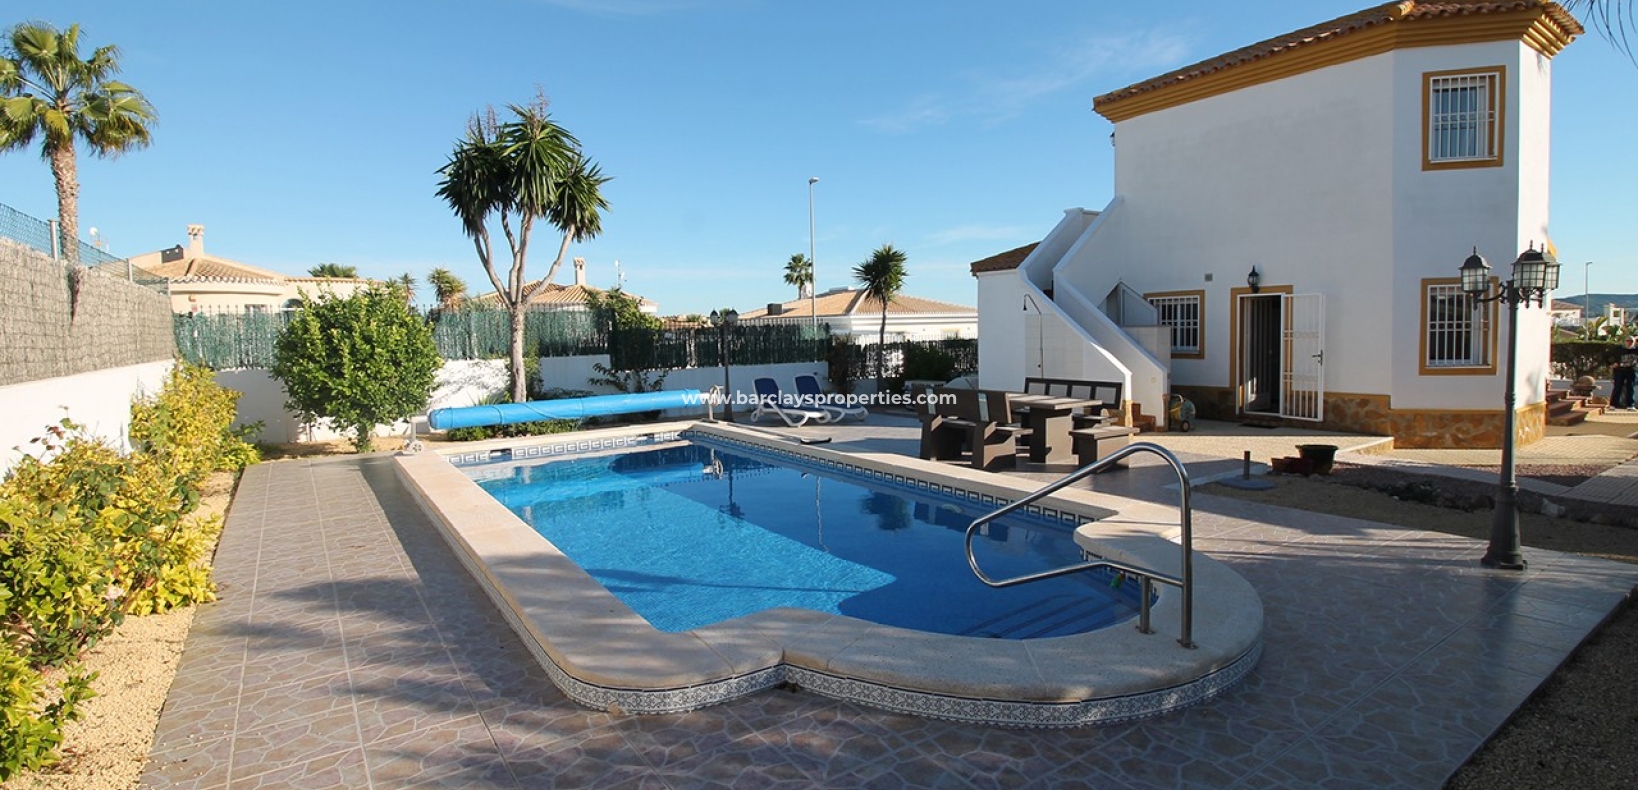 Main View - Detached Villa for sale in Urb. La Marina, With Pool